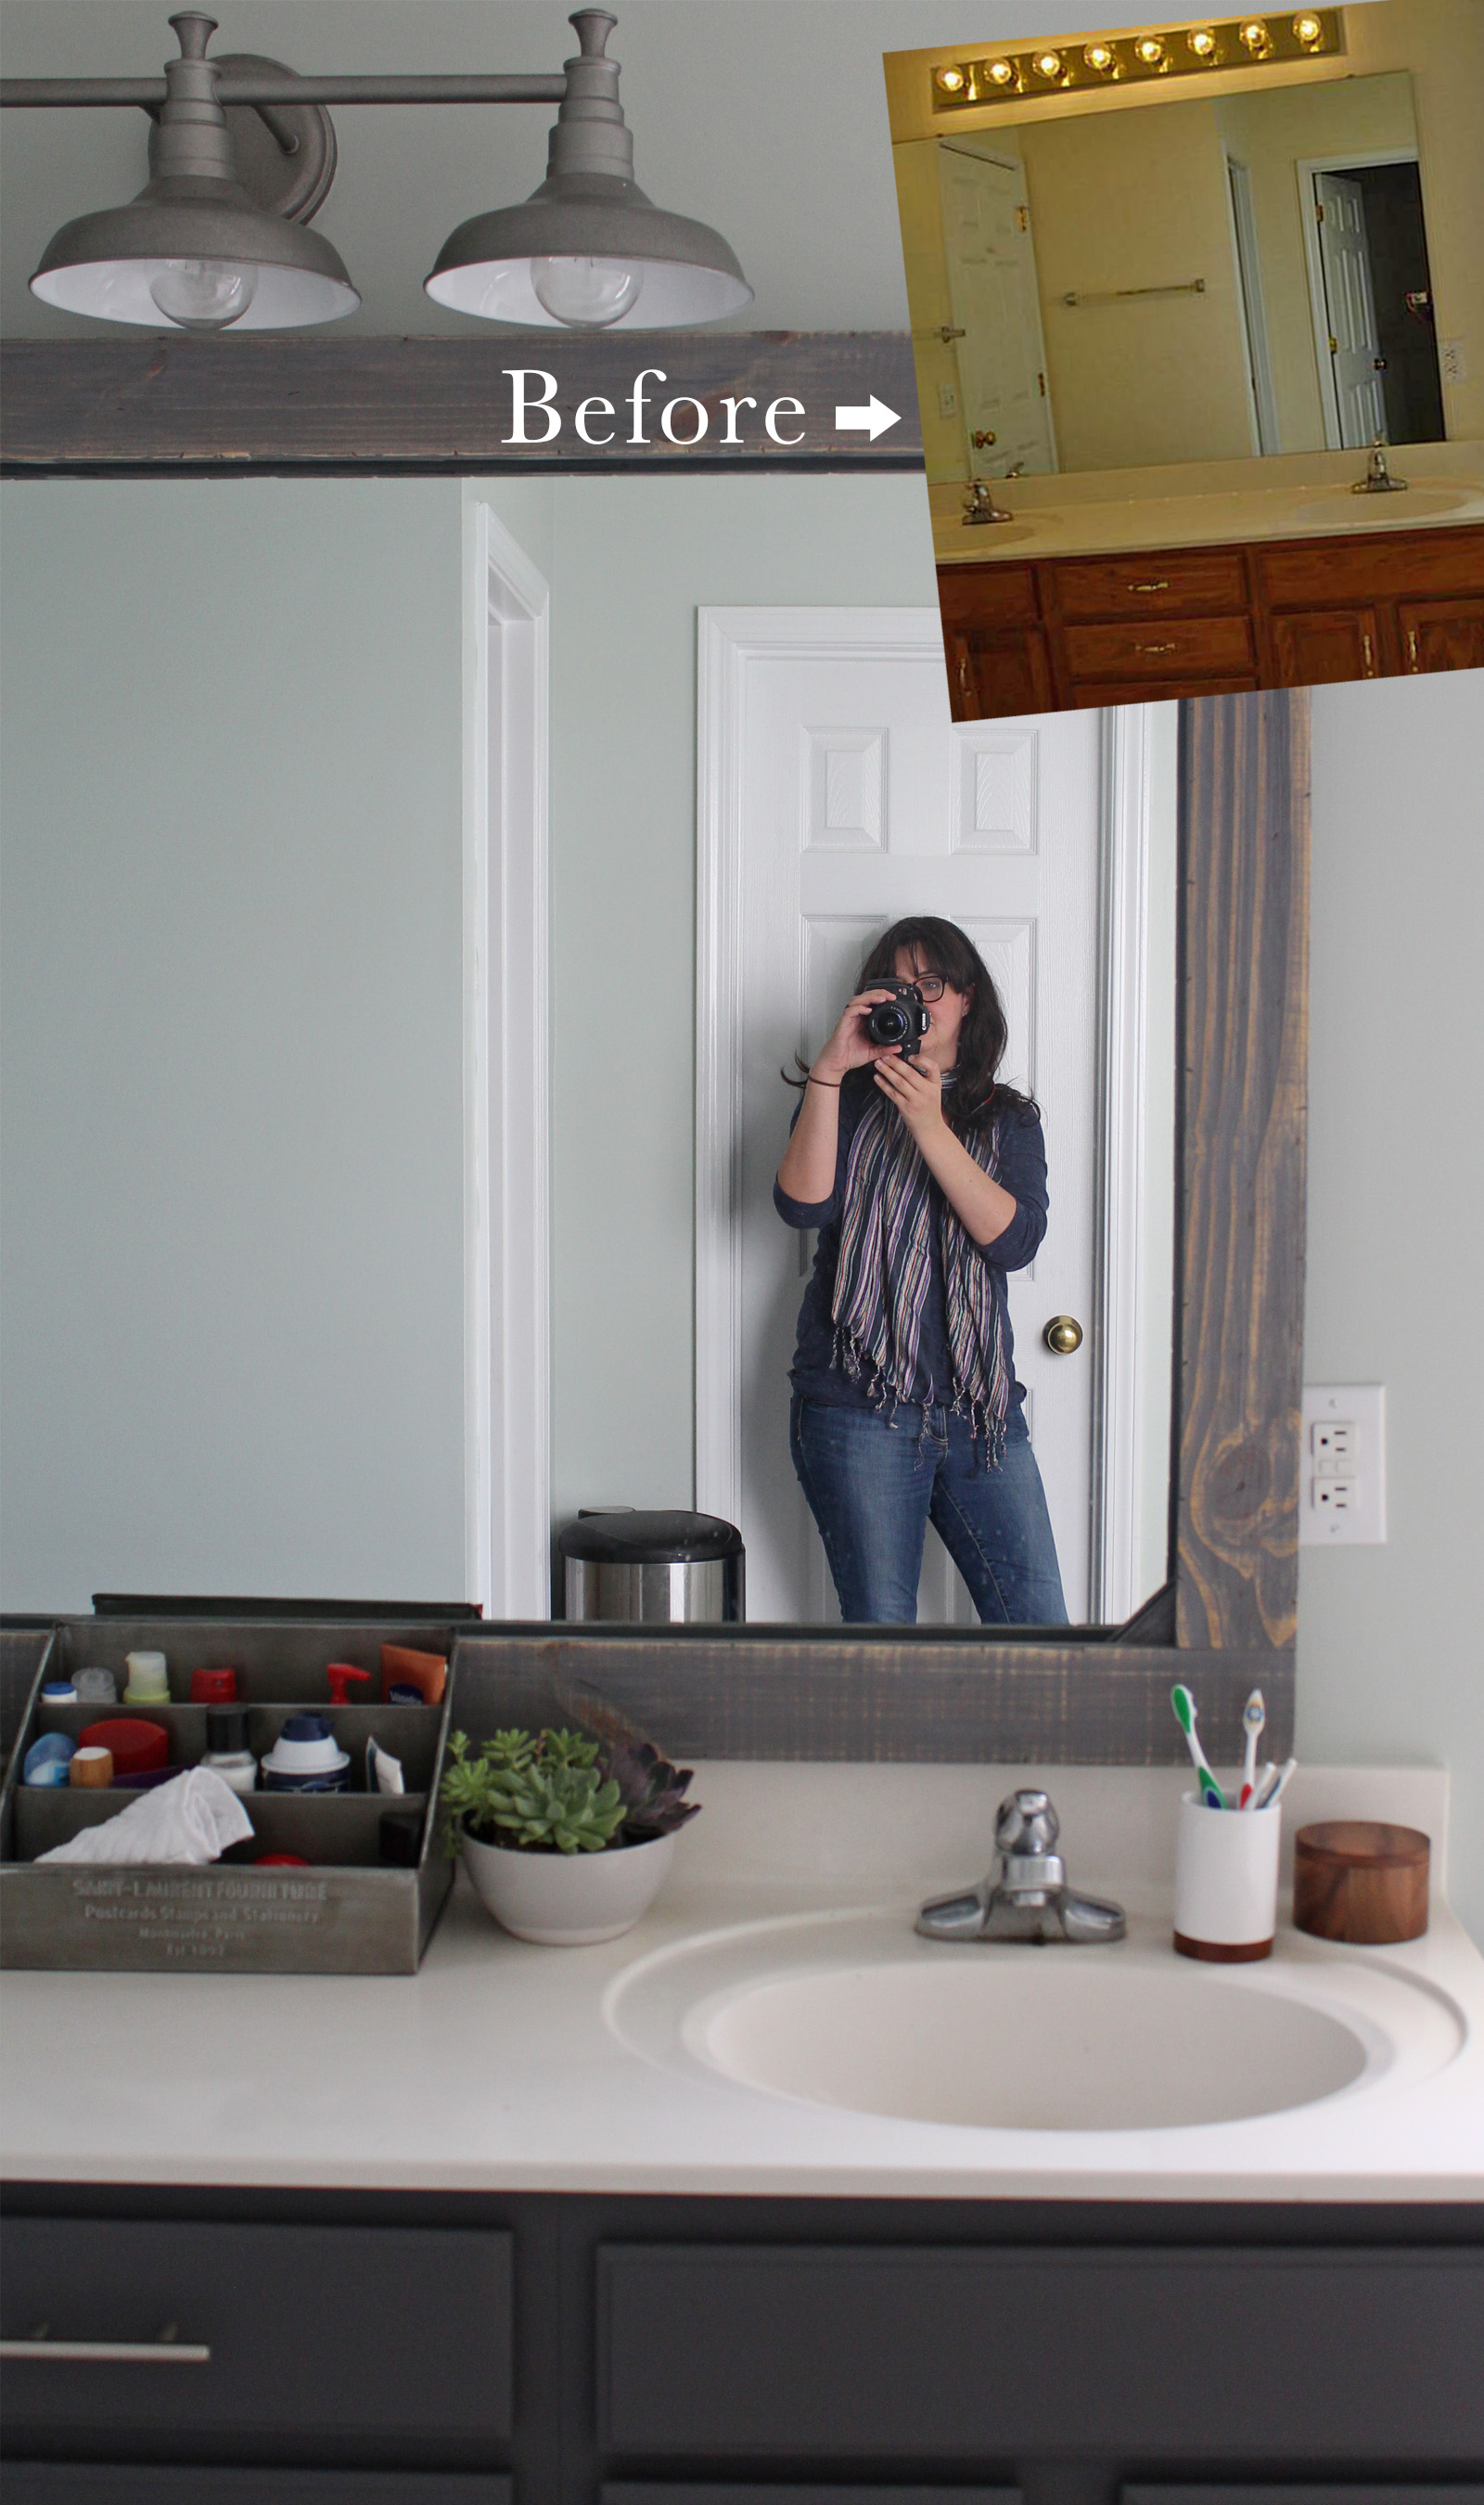 How To Frame A Mirror With Wood Tag, How To Add A Frame An Existing Mirror